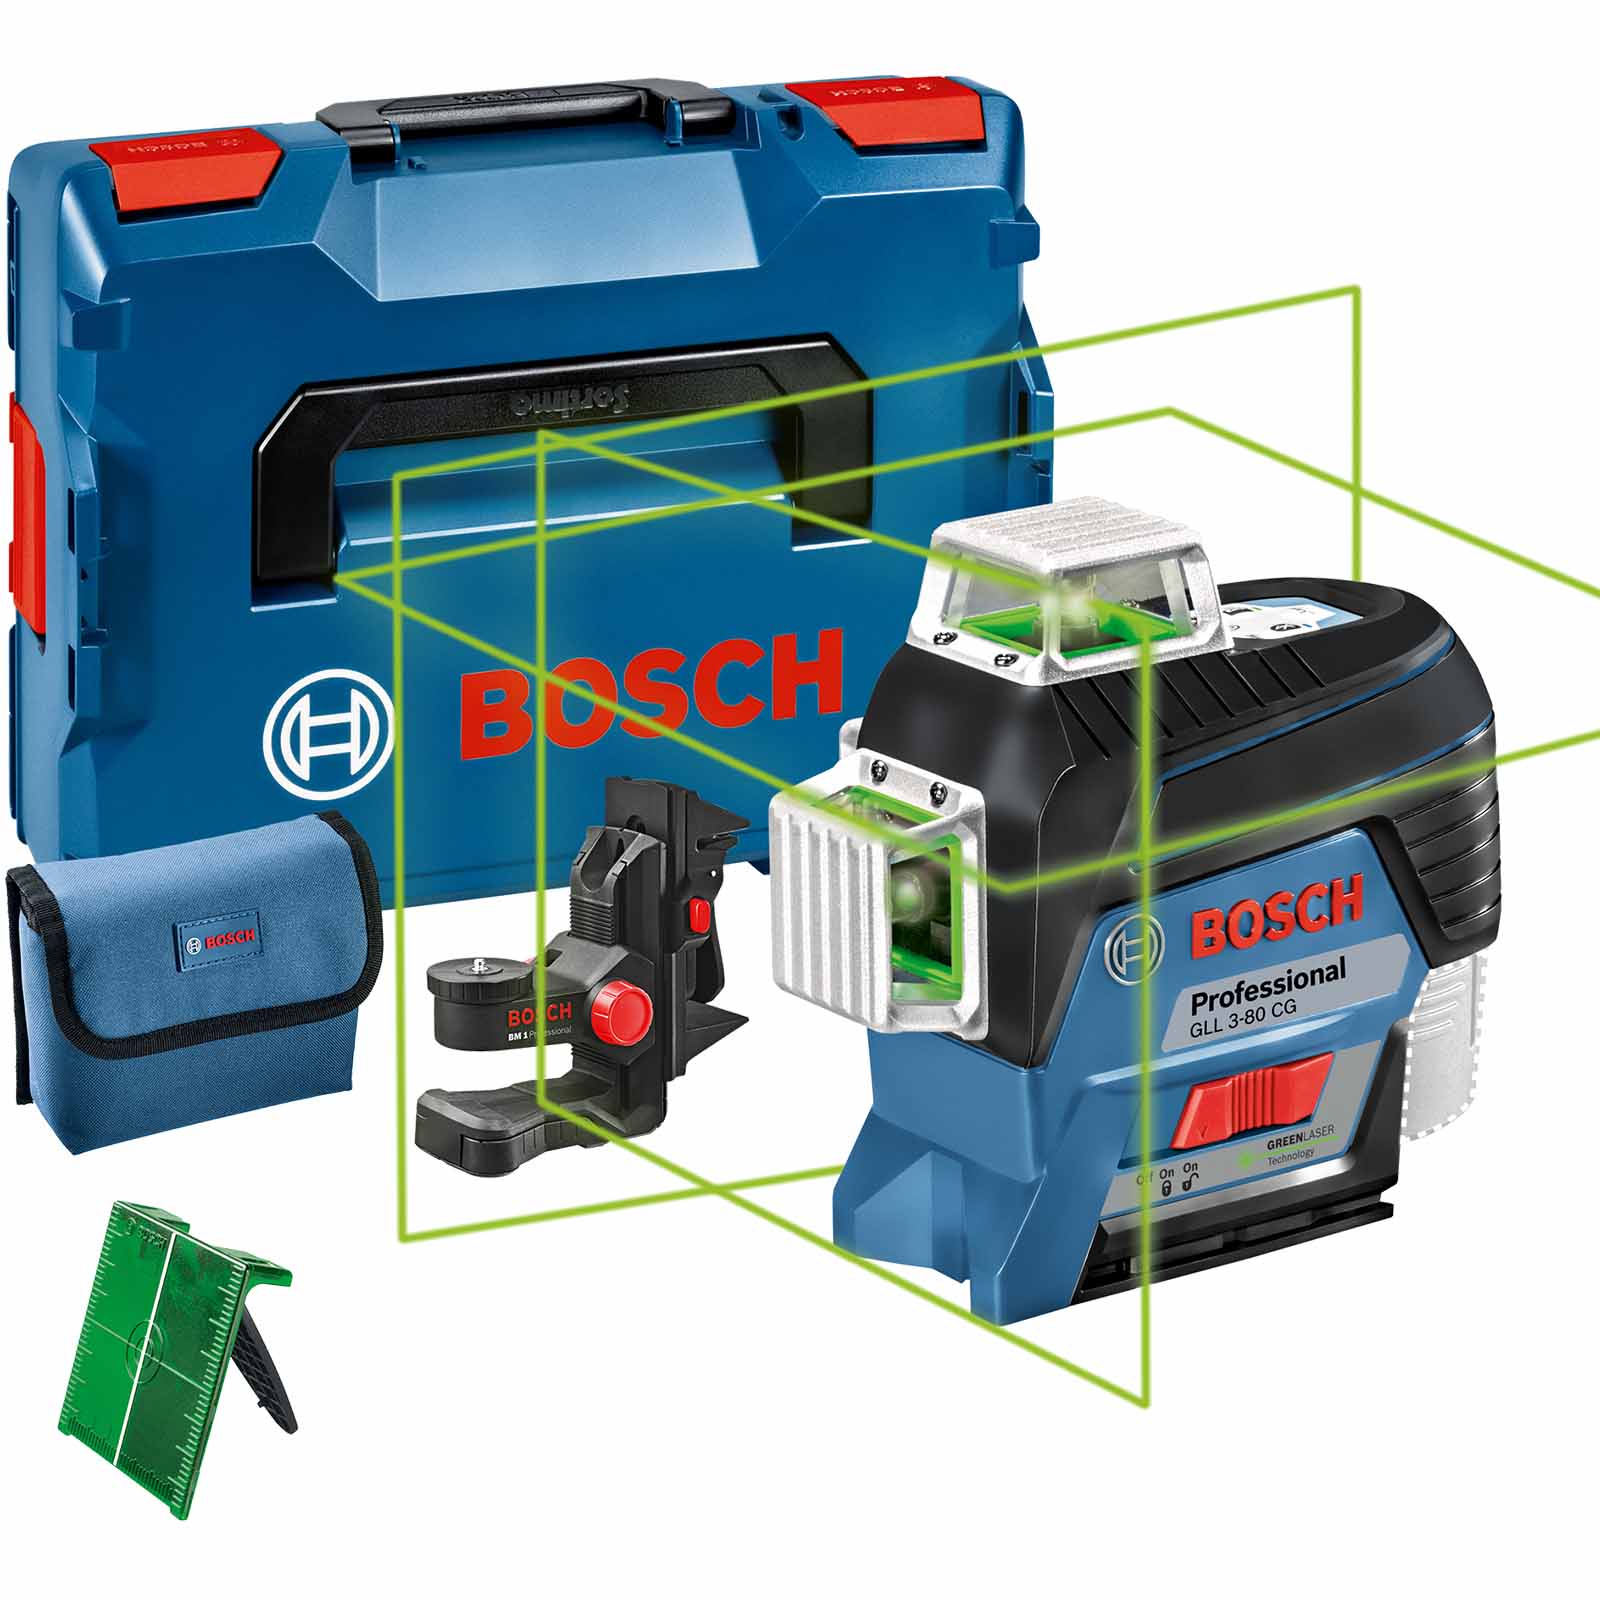 Bosch GLL 3-80 CG 12v Cordless Connected Green Line Laser Level No Batteries No Charger Case